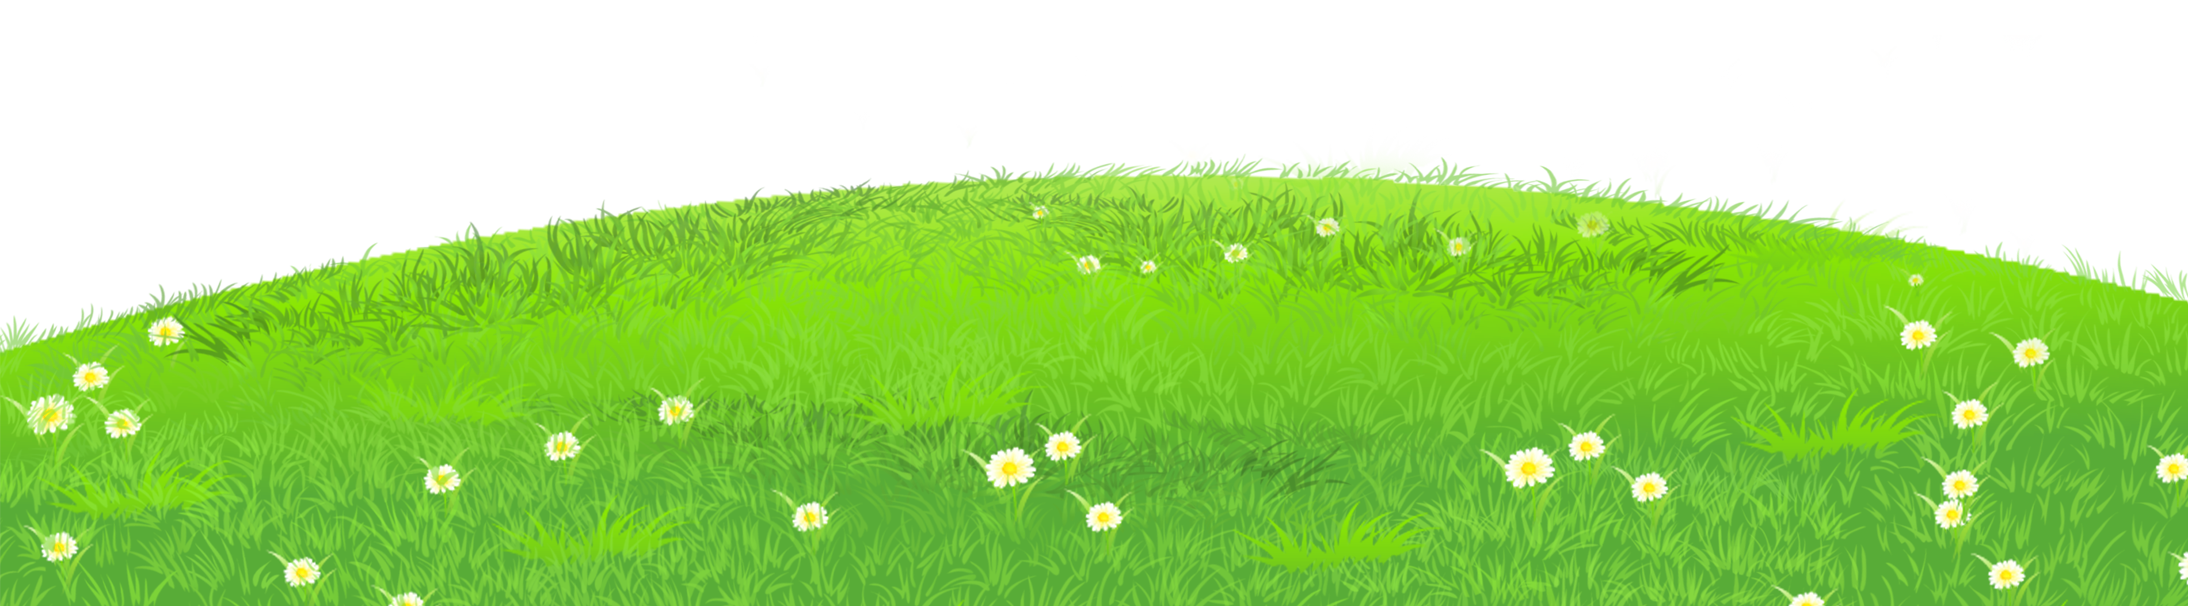 Grass clipart black and white free clipart images clipartcow